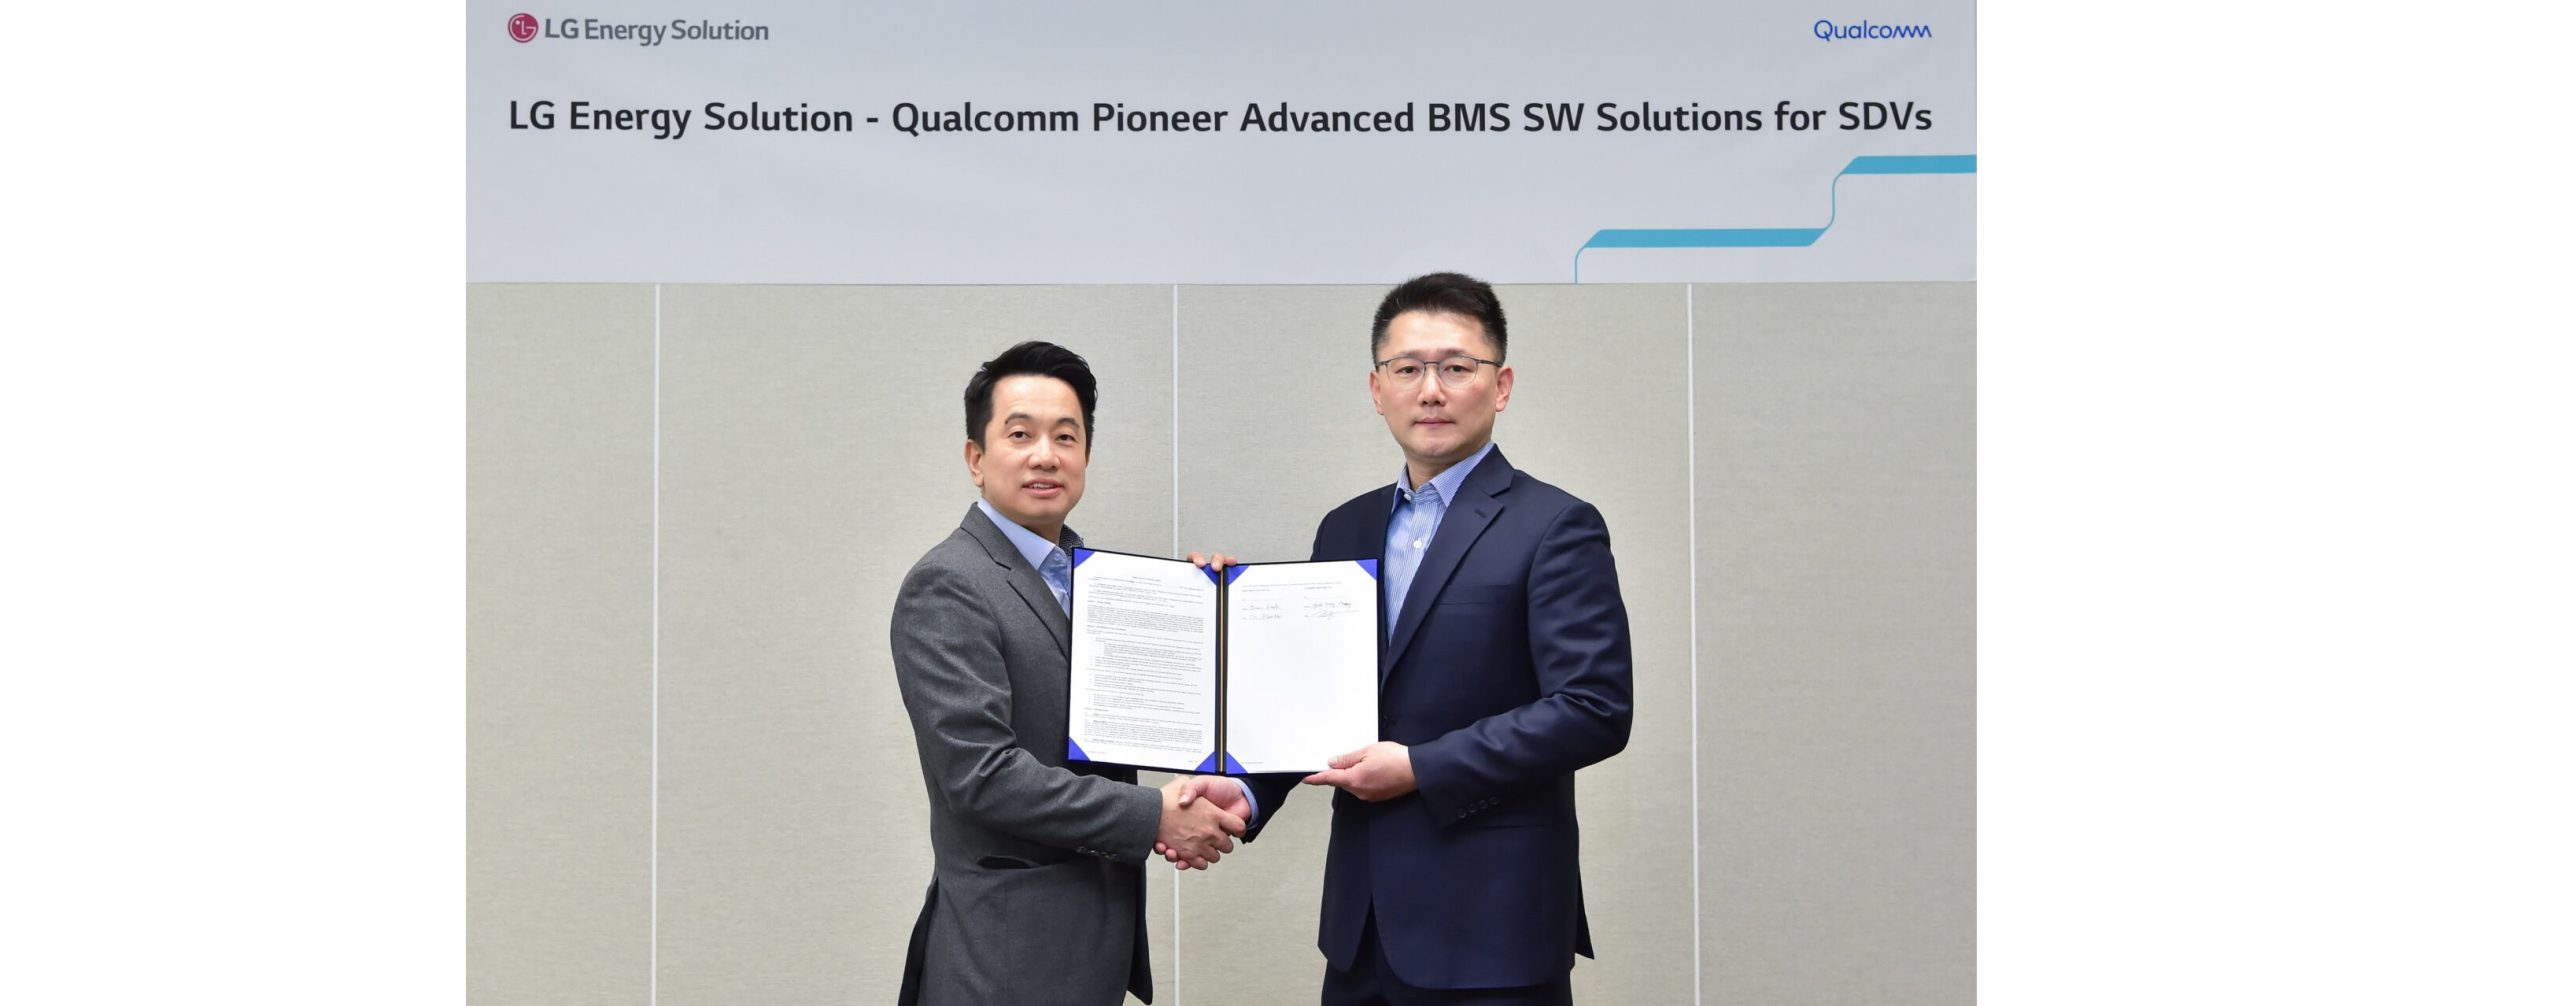 LG & Qualcomm collaborate on advanced BMS solutions